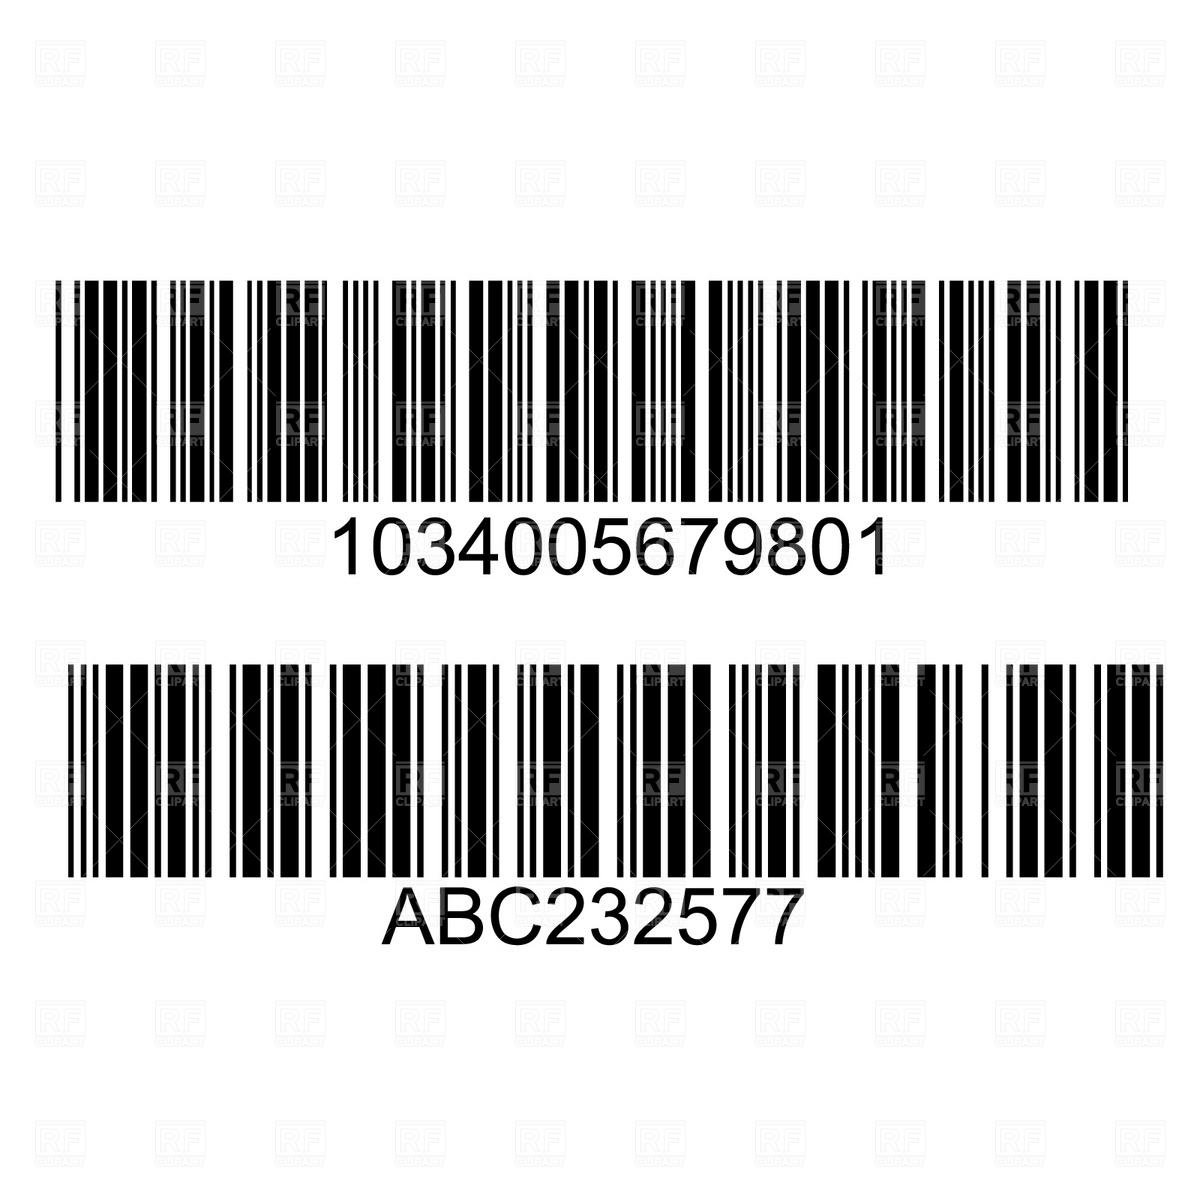 Barcode 1772 Download Royalty Free Vector Clipart  Eps